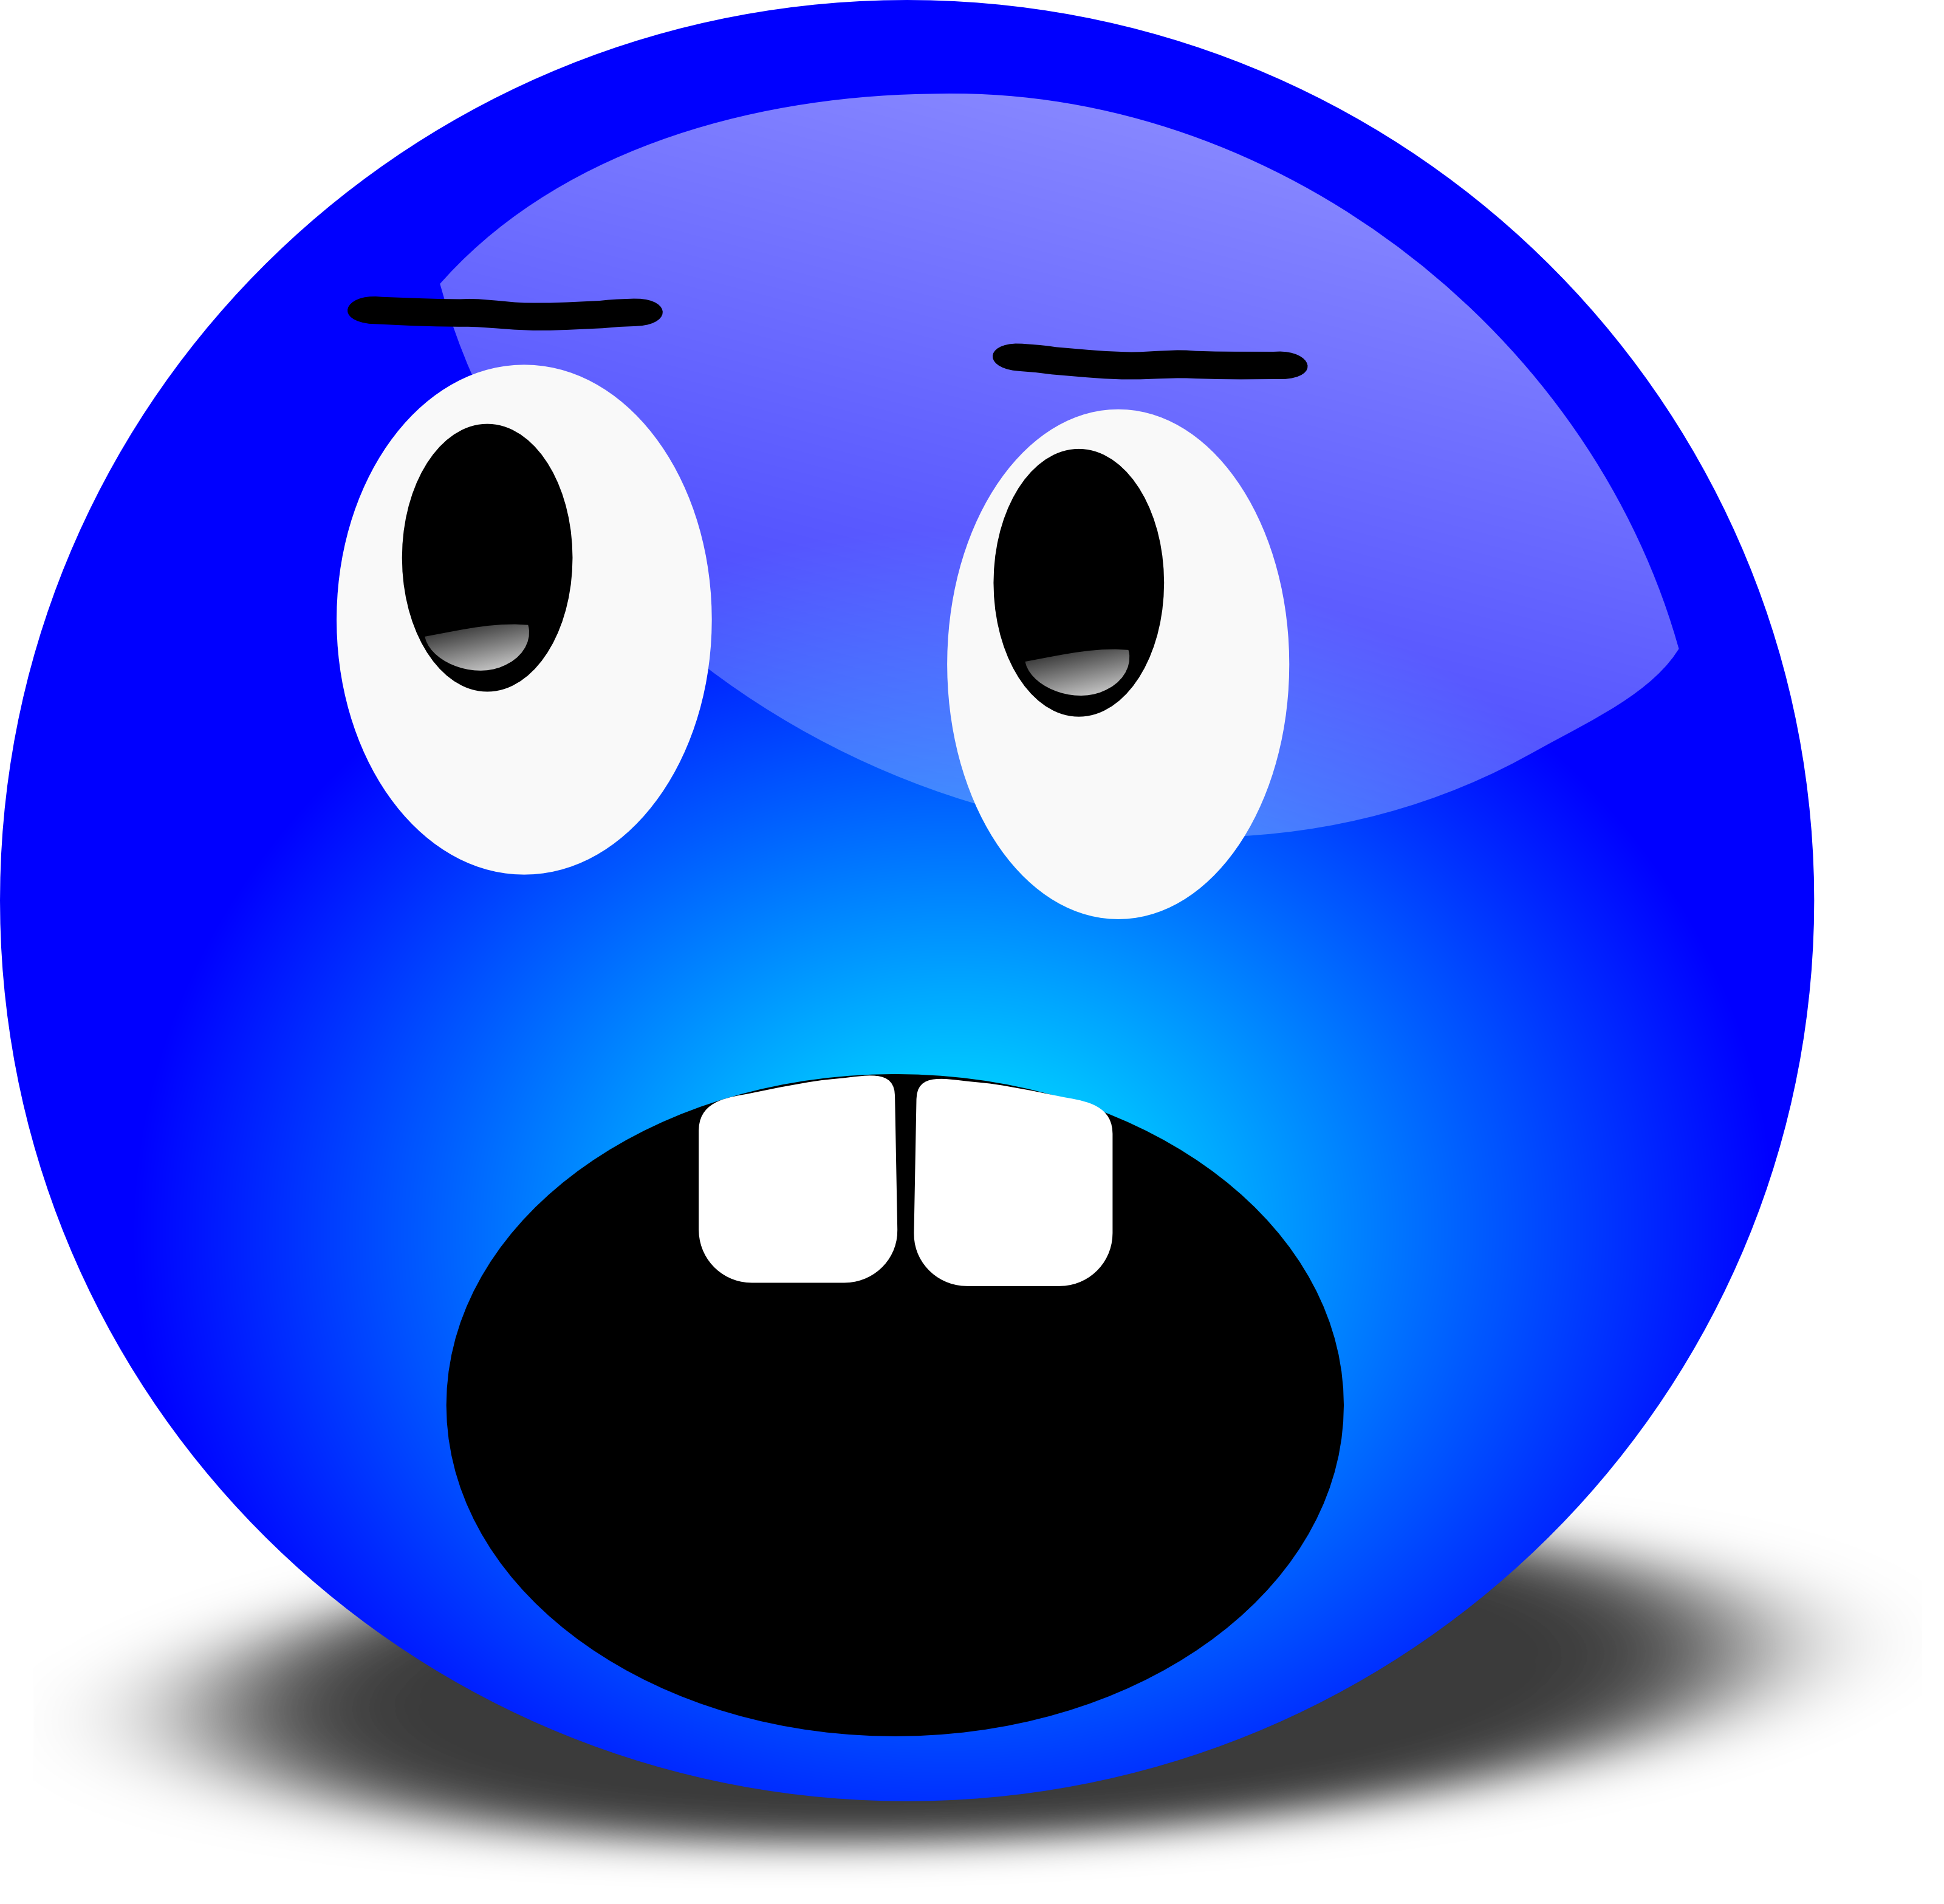 Surprised Smiley Face Clipart